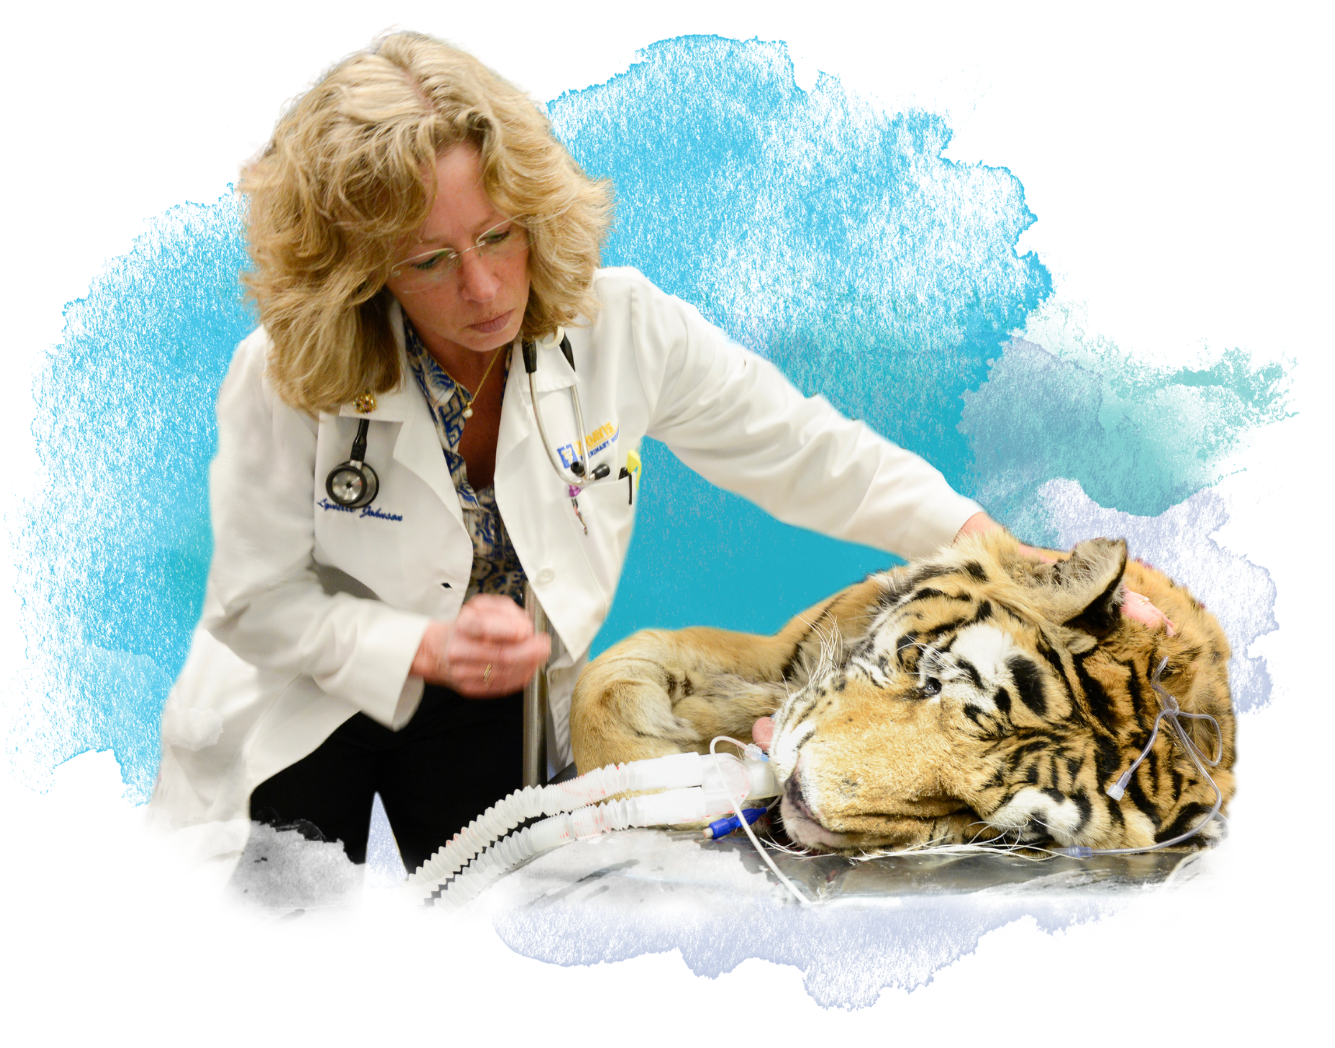 Dr. Lynelle Johnson with a tiger patient